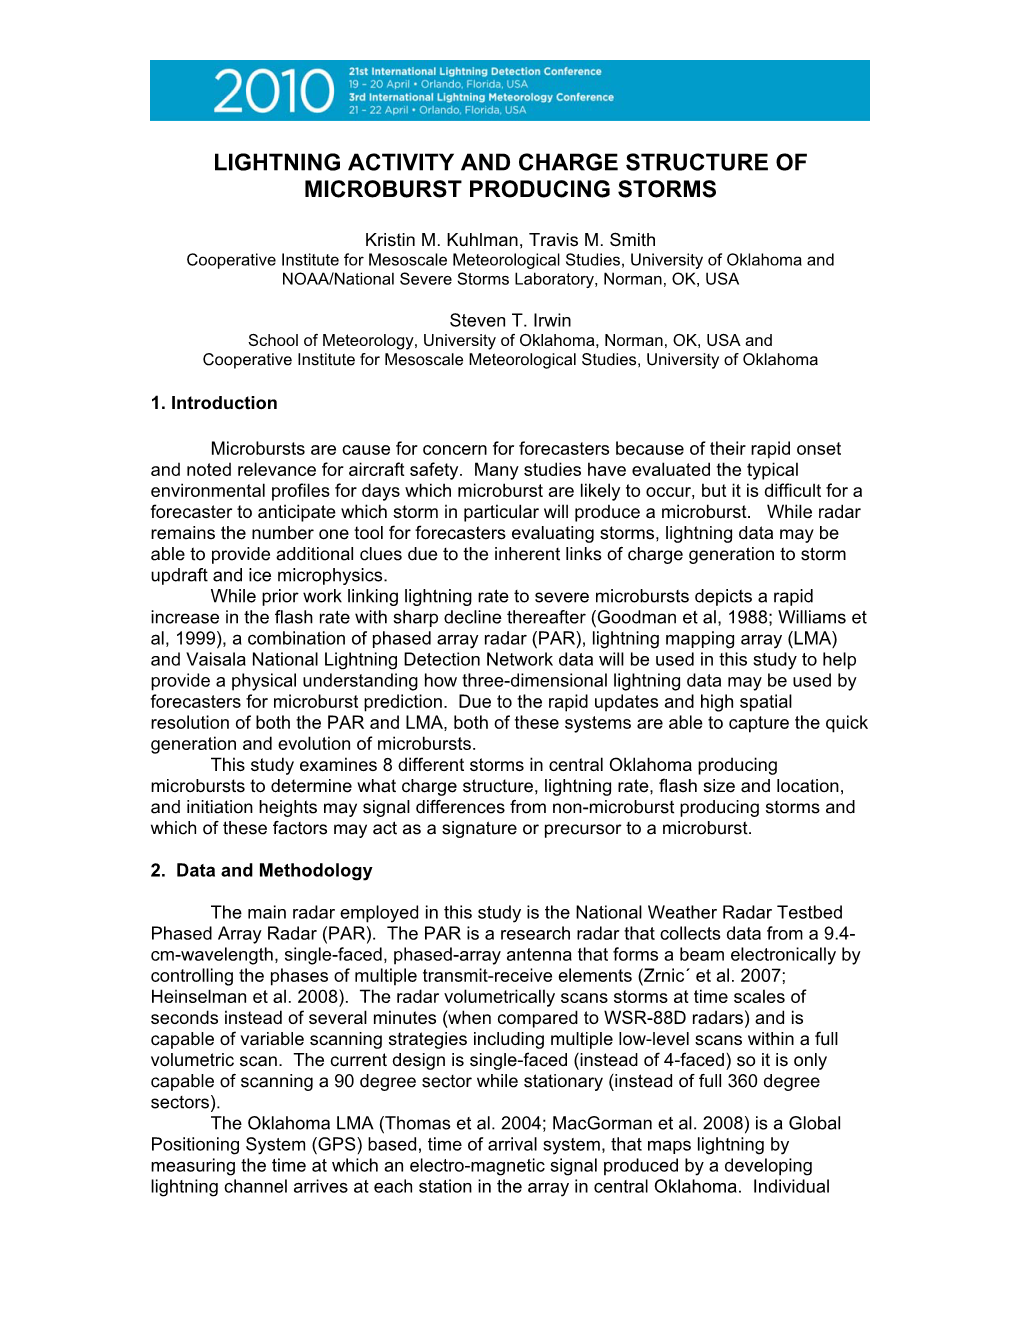 Lightning Activity and Charge Structure of Microburst Producing Storms